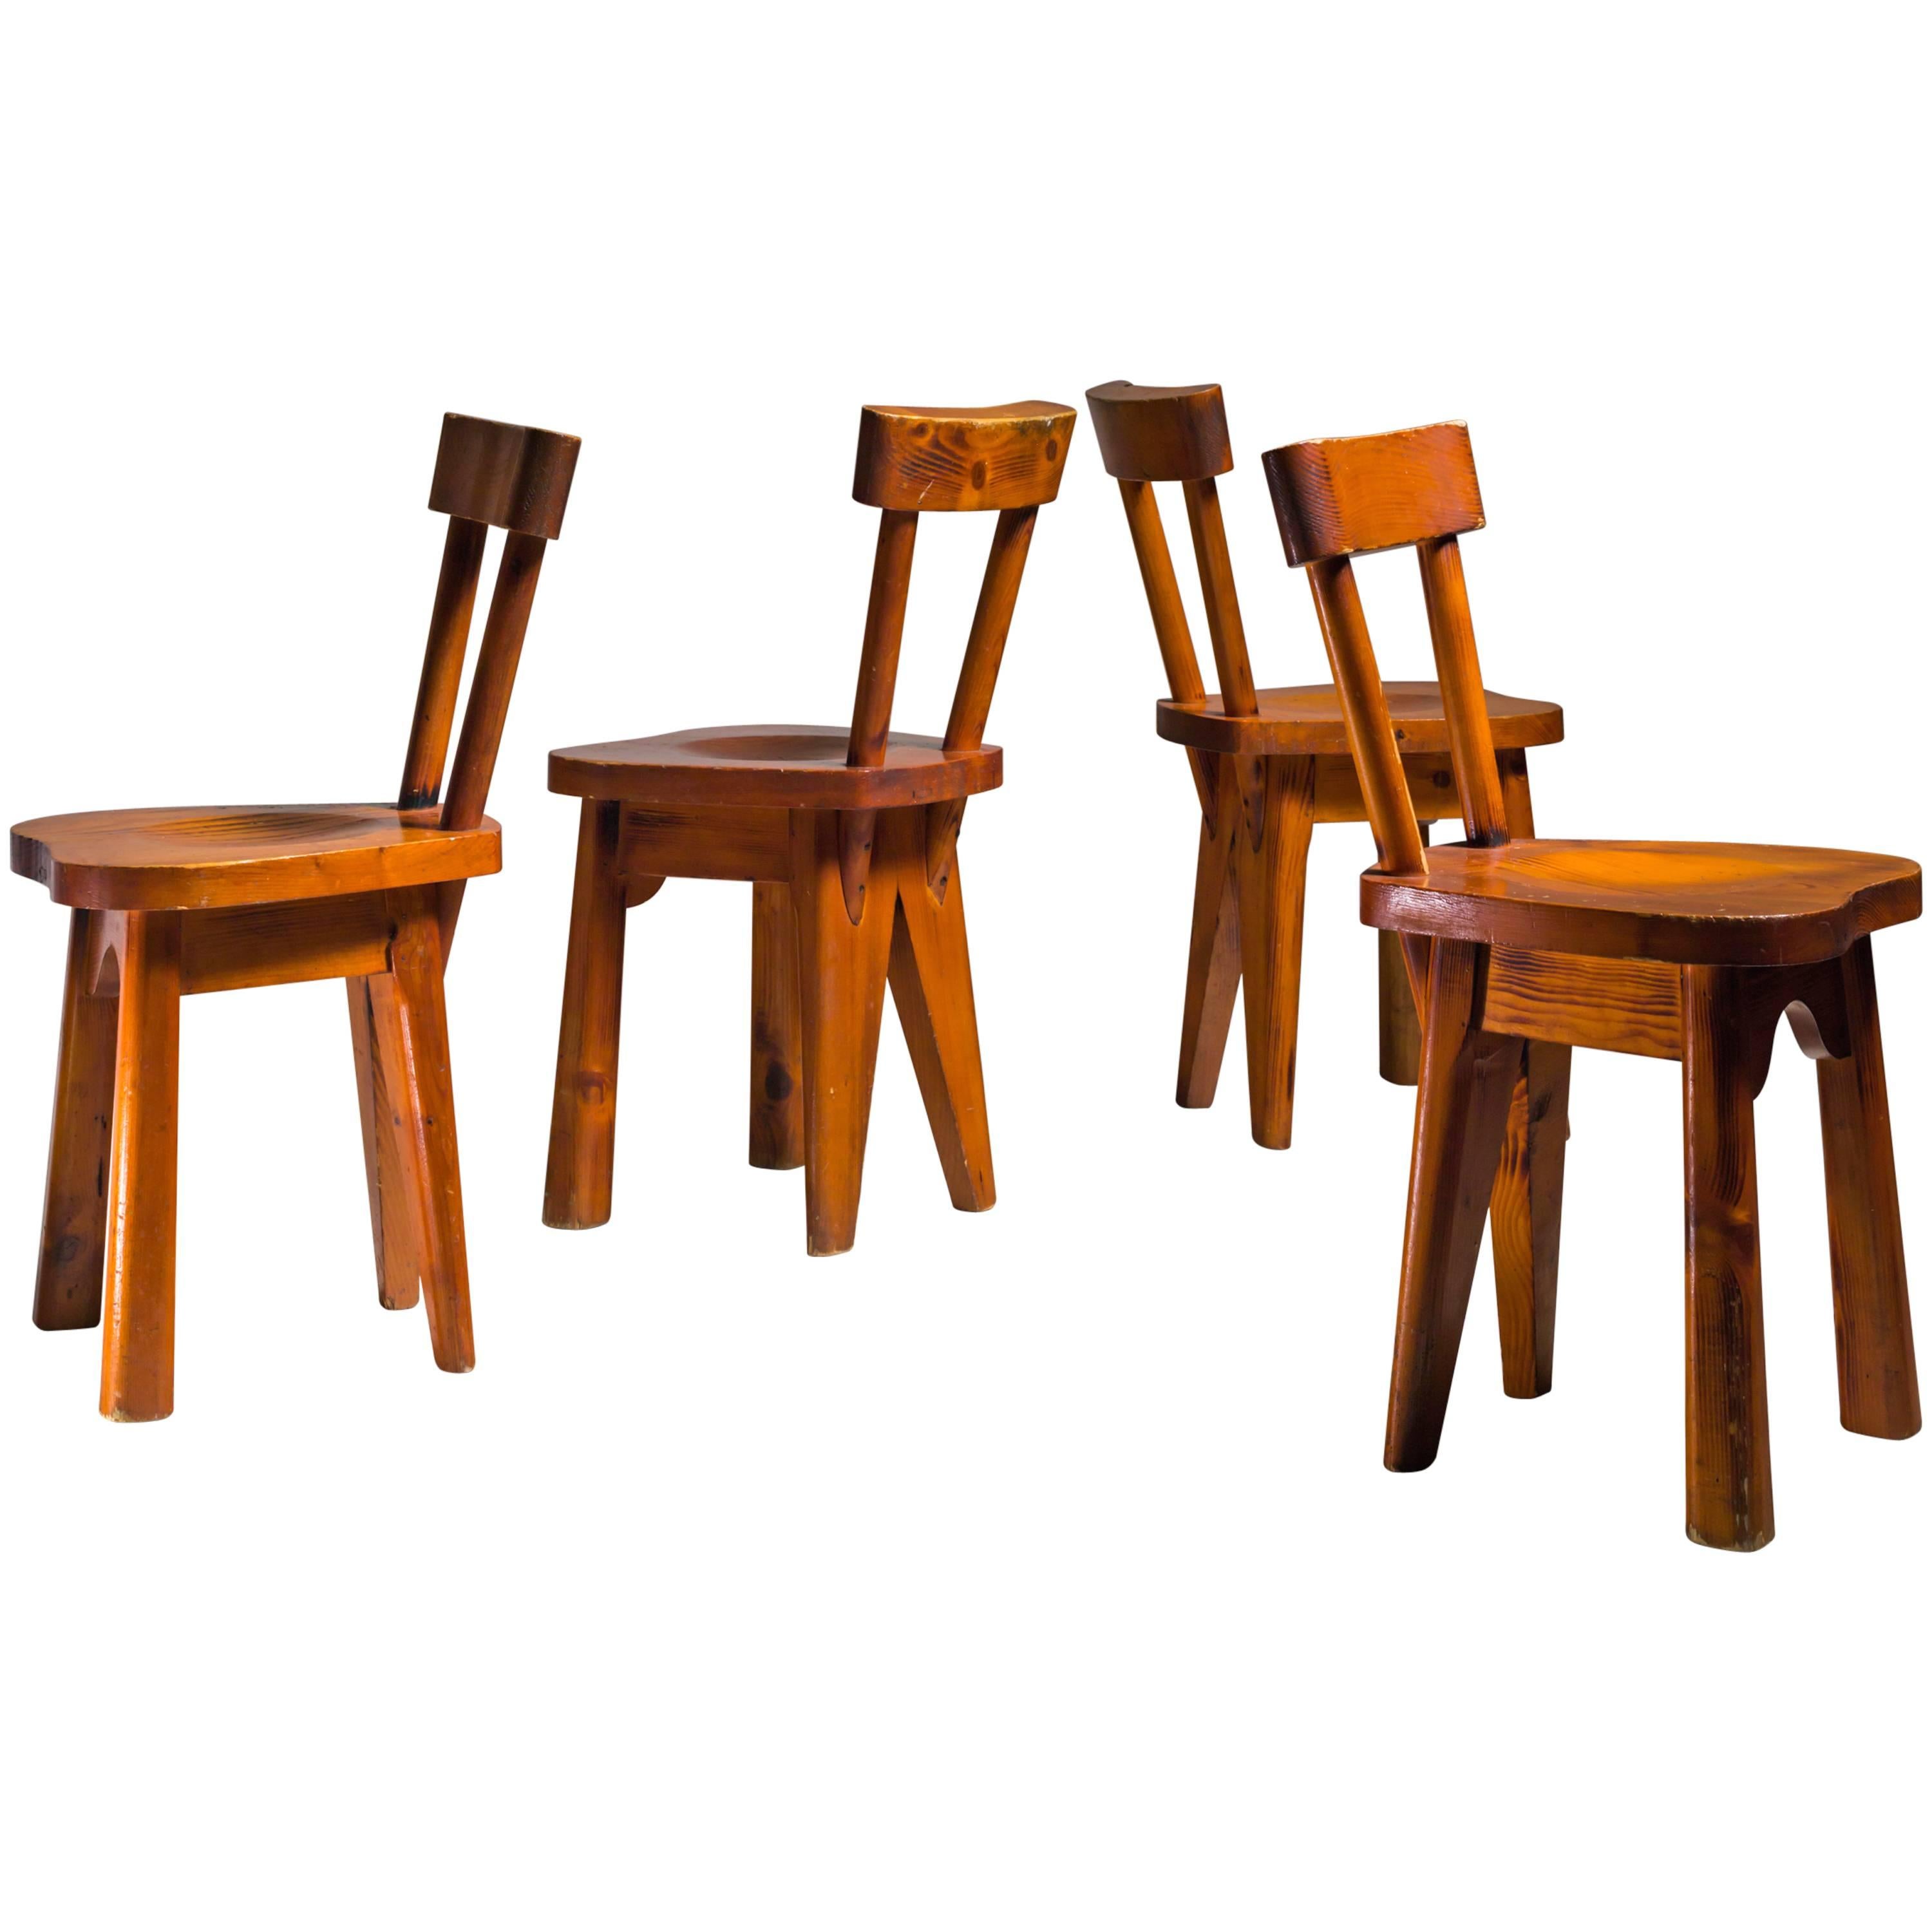 Renee Faublee Set of Four Pine Campagne Style Dining Chairs, France, 1950s For Sale